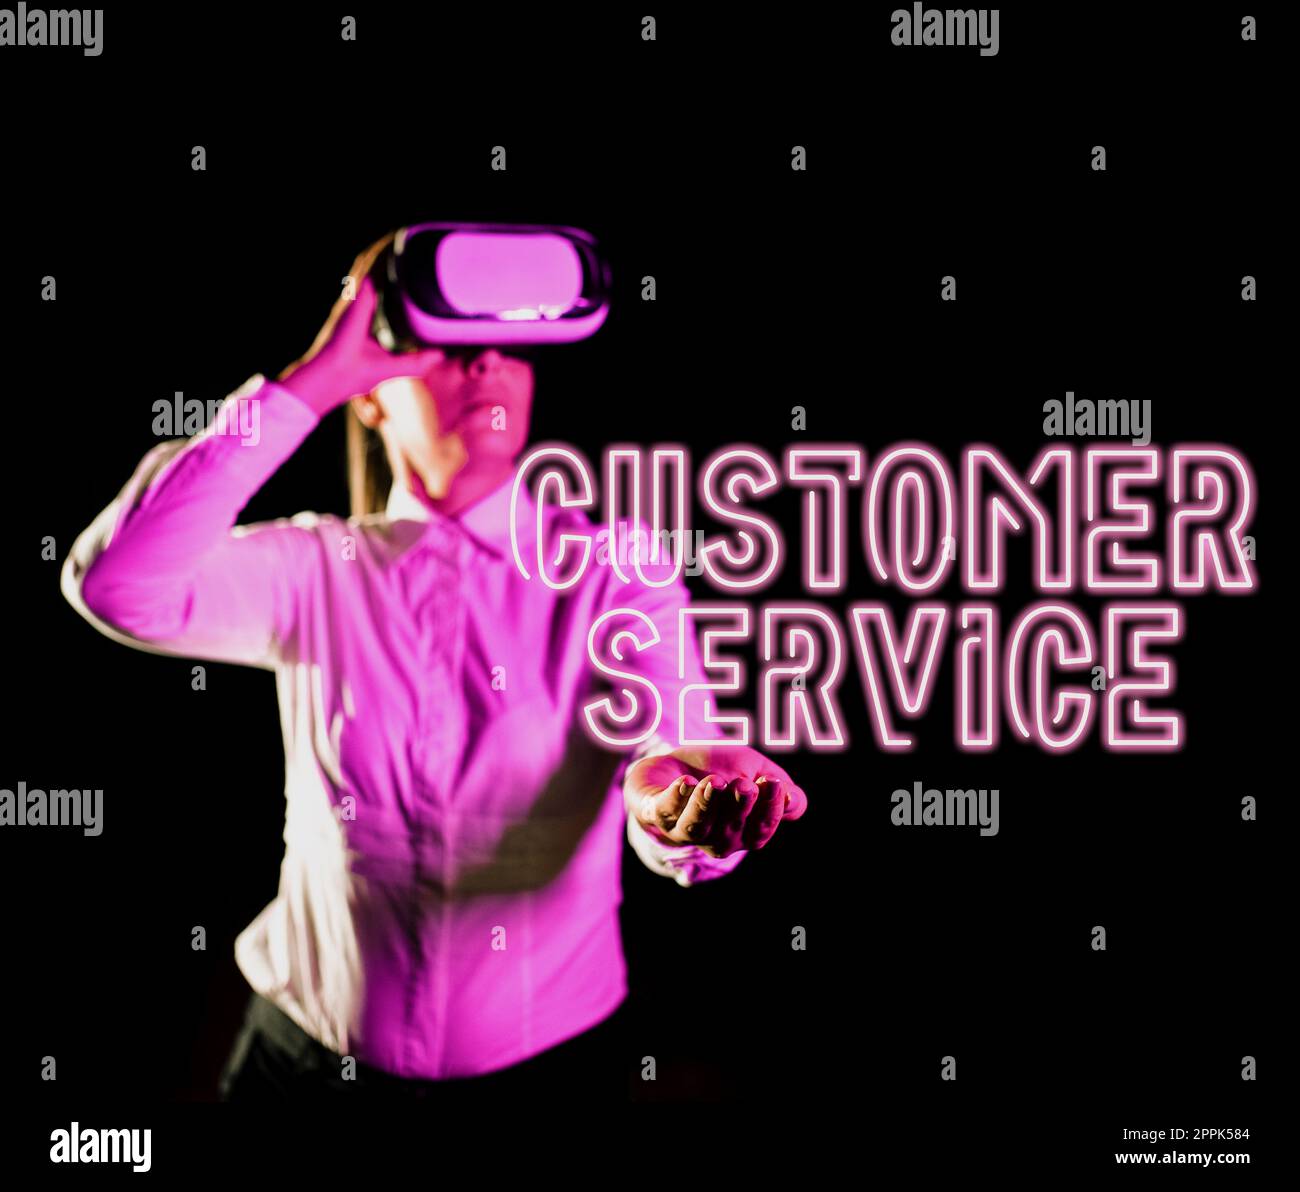 Sign displaying Customer Service. Business showcase direct interaction with the consumers offering support Stock Photo